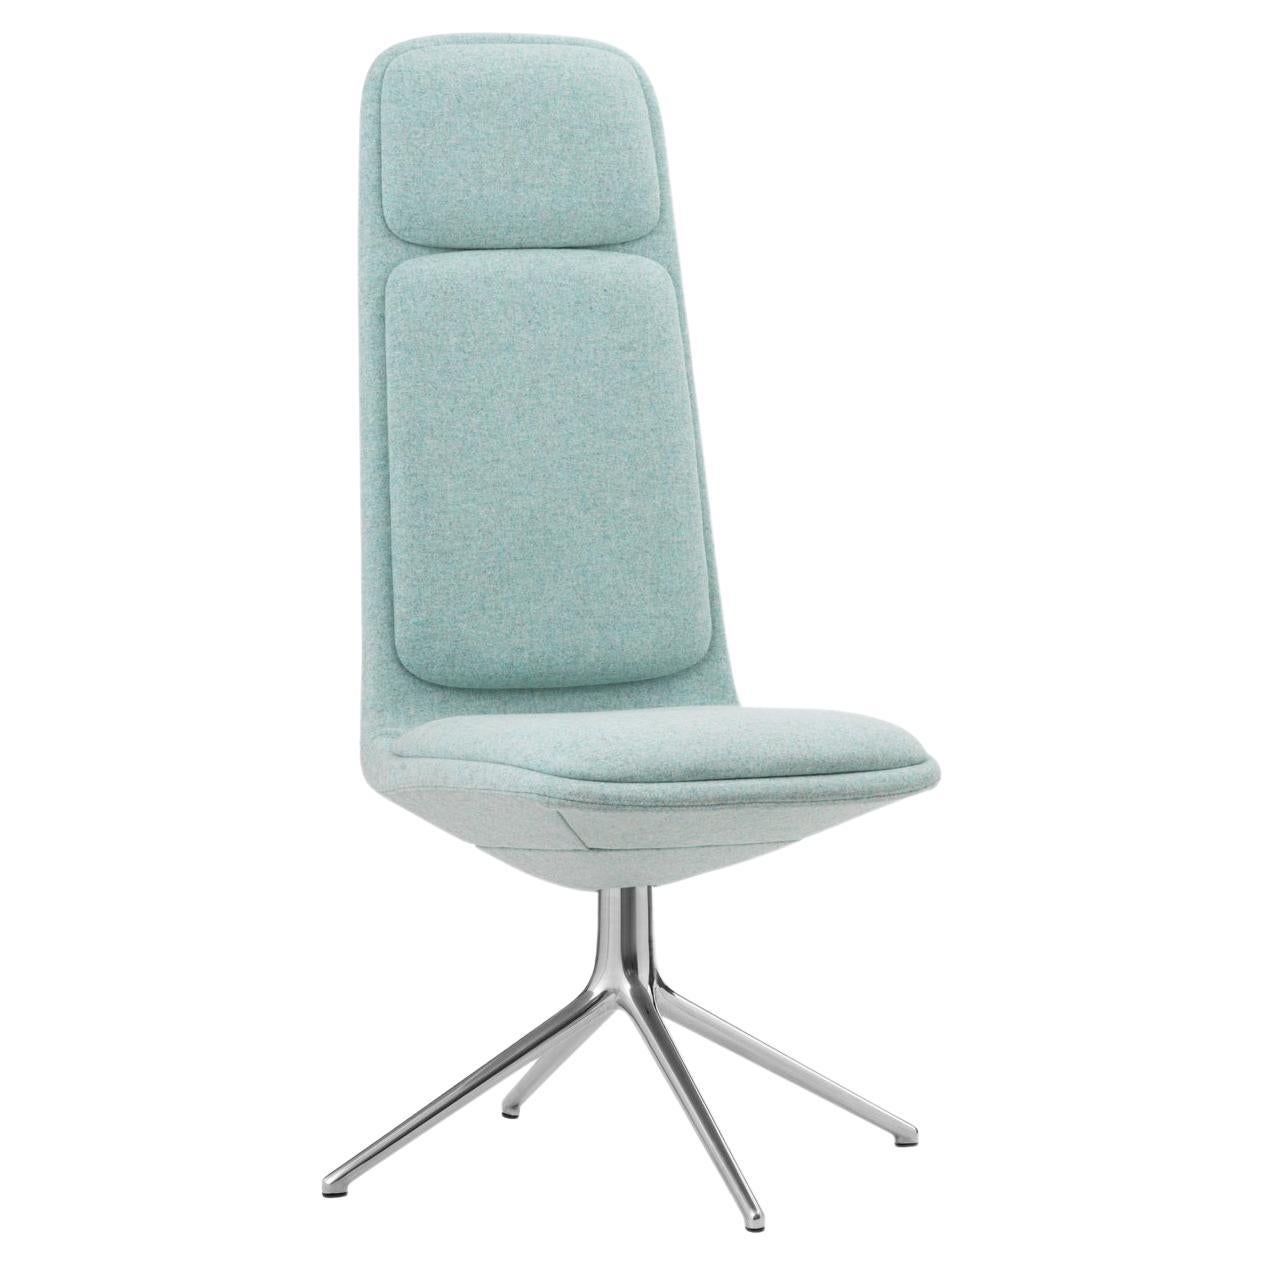 This item is made to order and produced according to your specific choices of fabric and color. 
Seat: rigid PU foam and full upholstery - Divina MD 813 with a steel reinforcement structure inside.
Legs and armrests: Polished aluminum or black